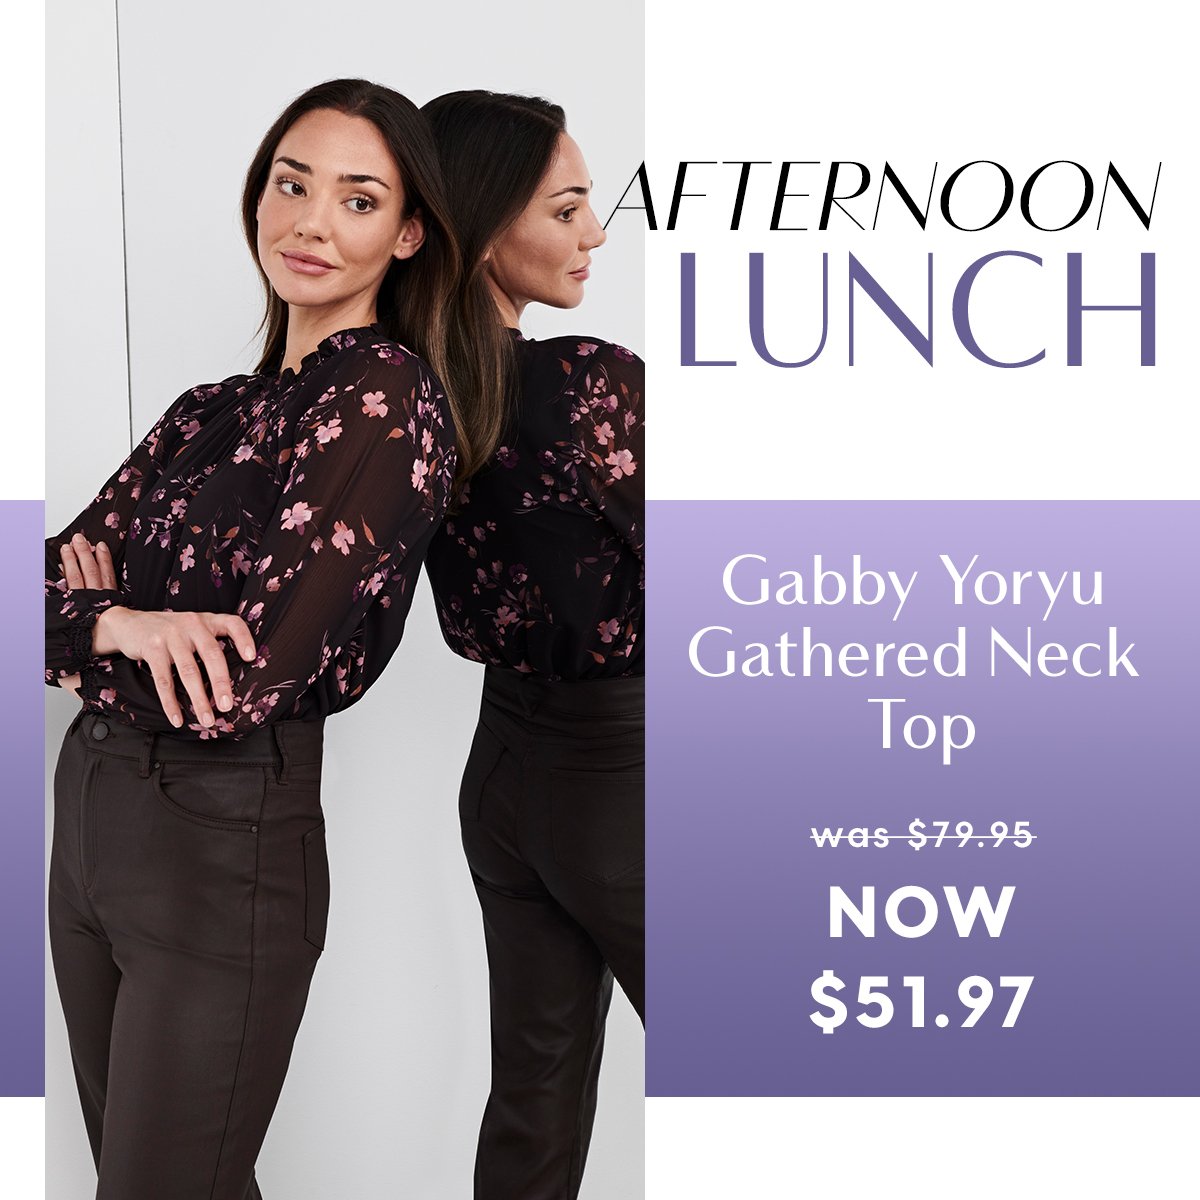 Afternoon Lunch. Gabby Yoryu Gathered Neck Top.